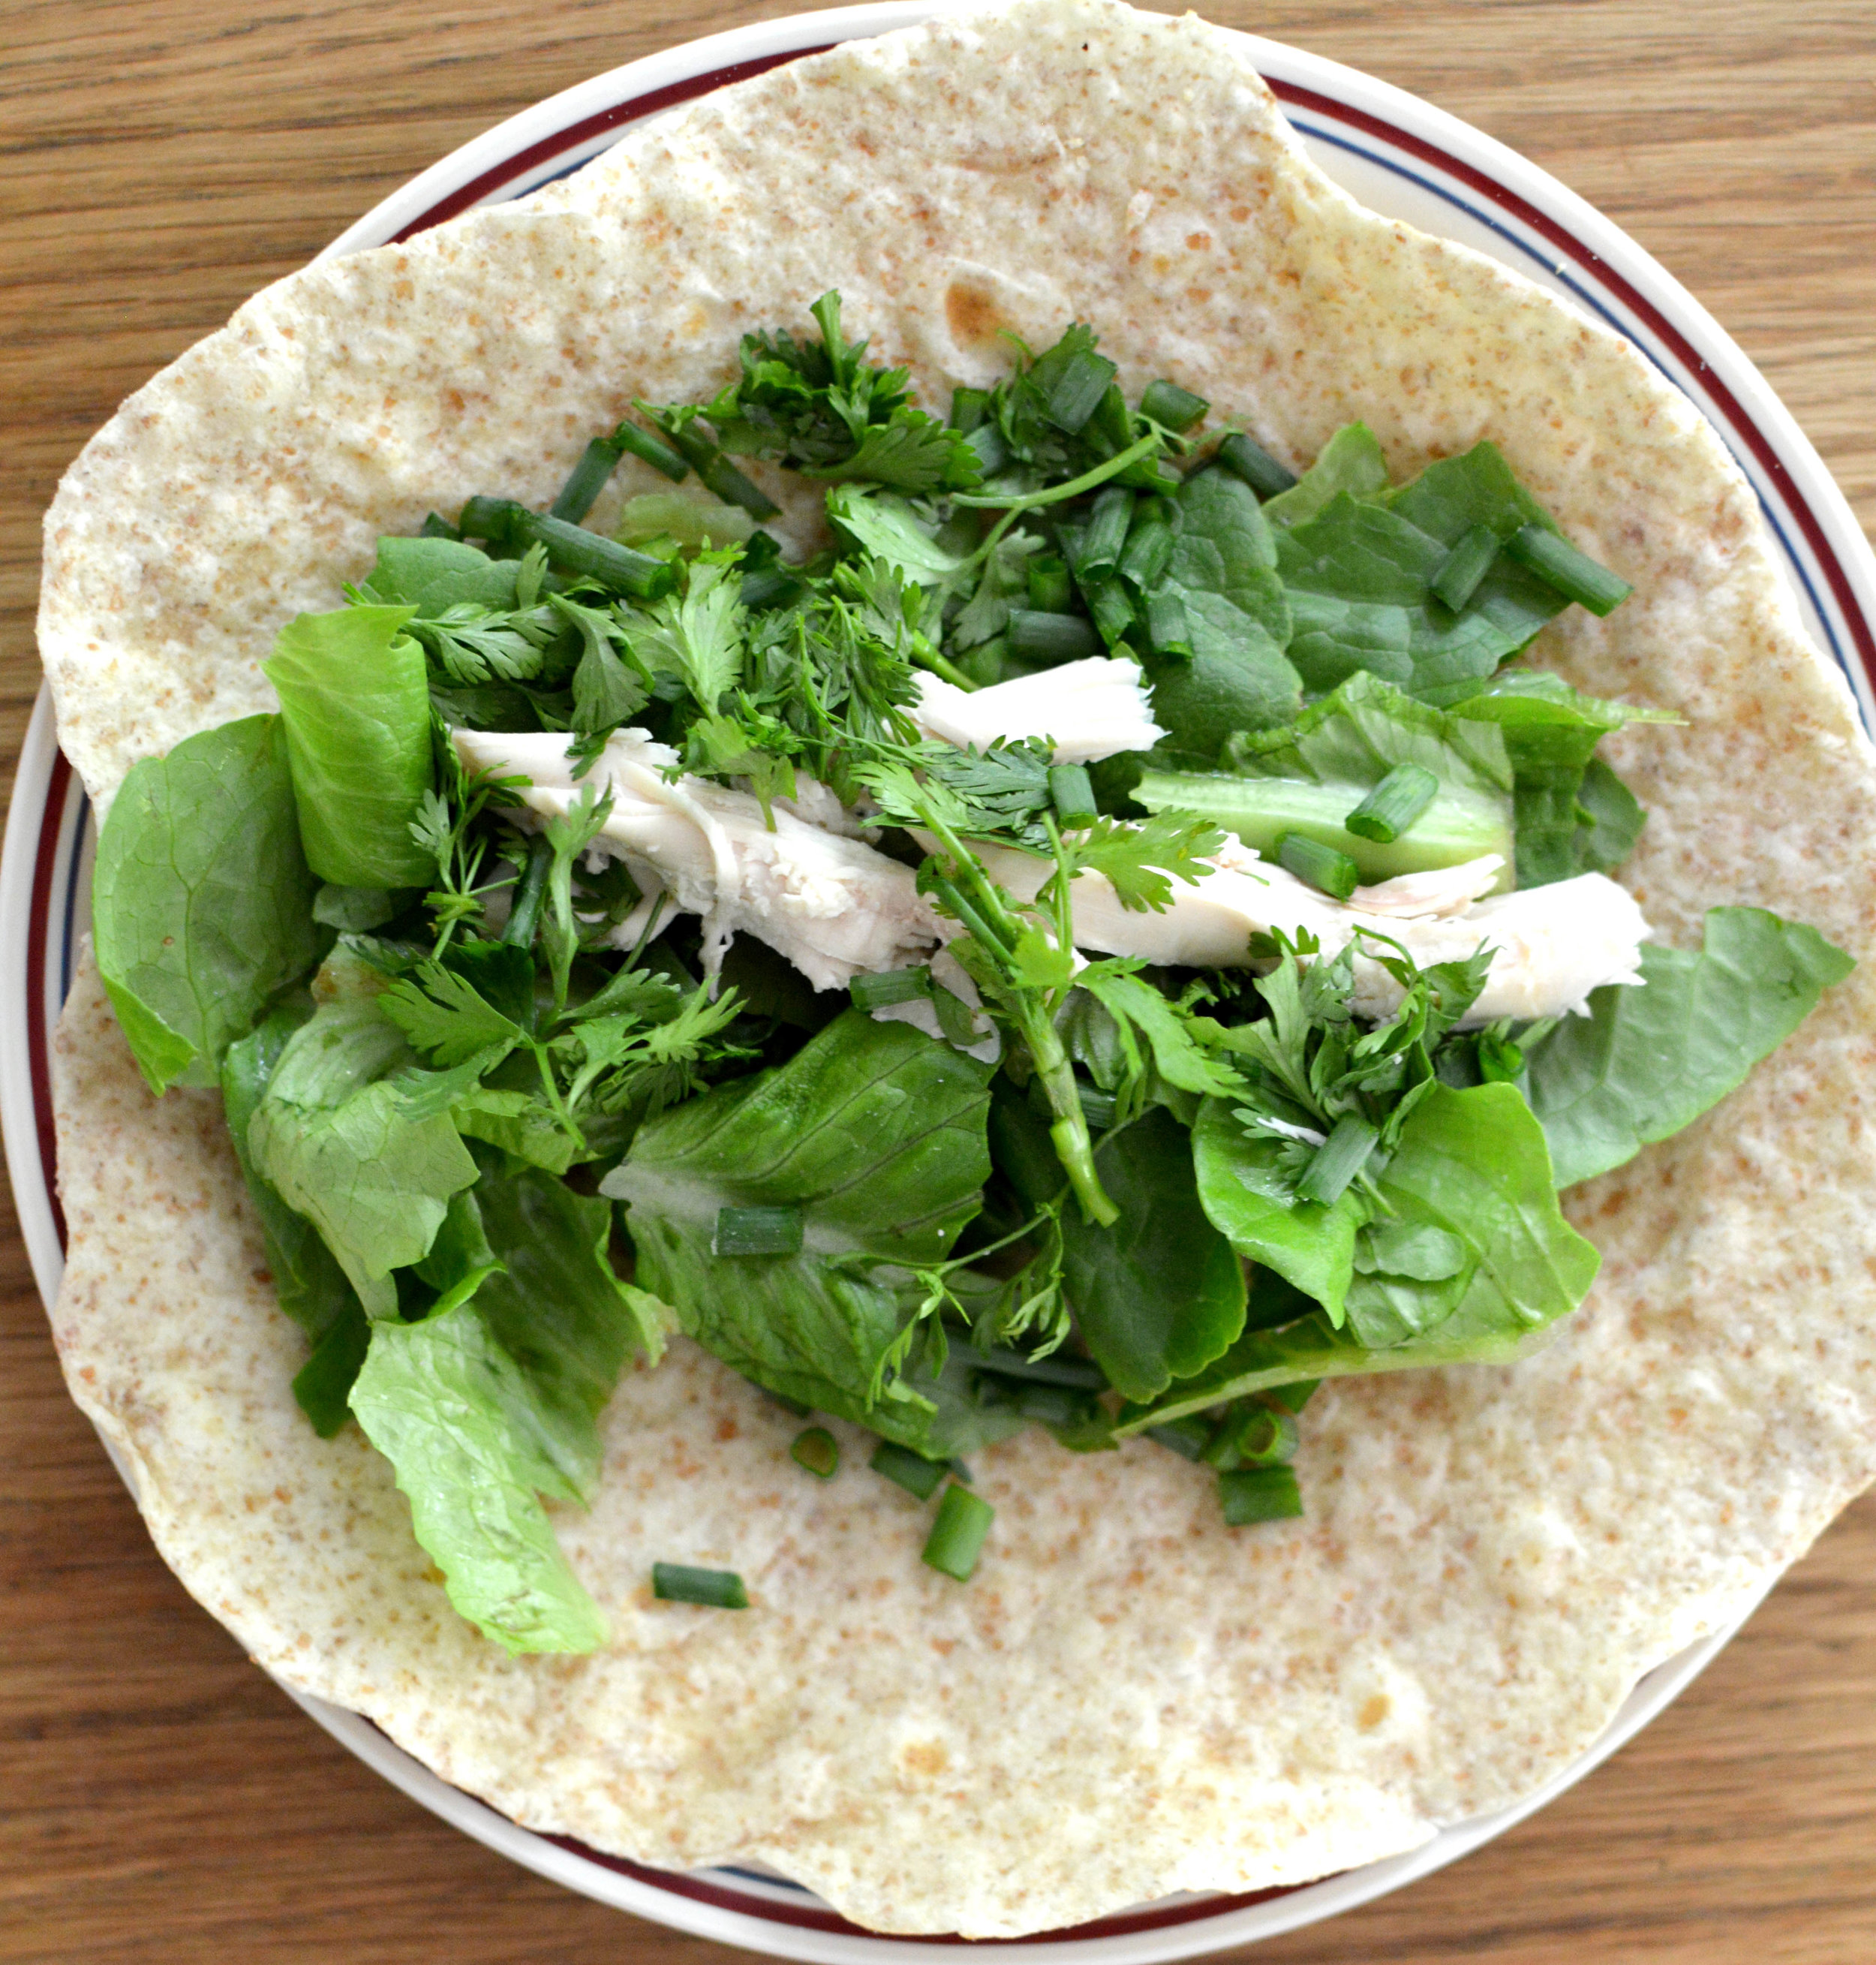  Homemade Spelt Flour Tortillas with lettuce, cilantro, green onions, chicken, and homemade dressing. We roll them up and eat them like a wrap. 